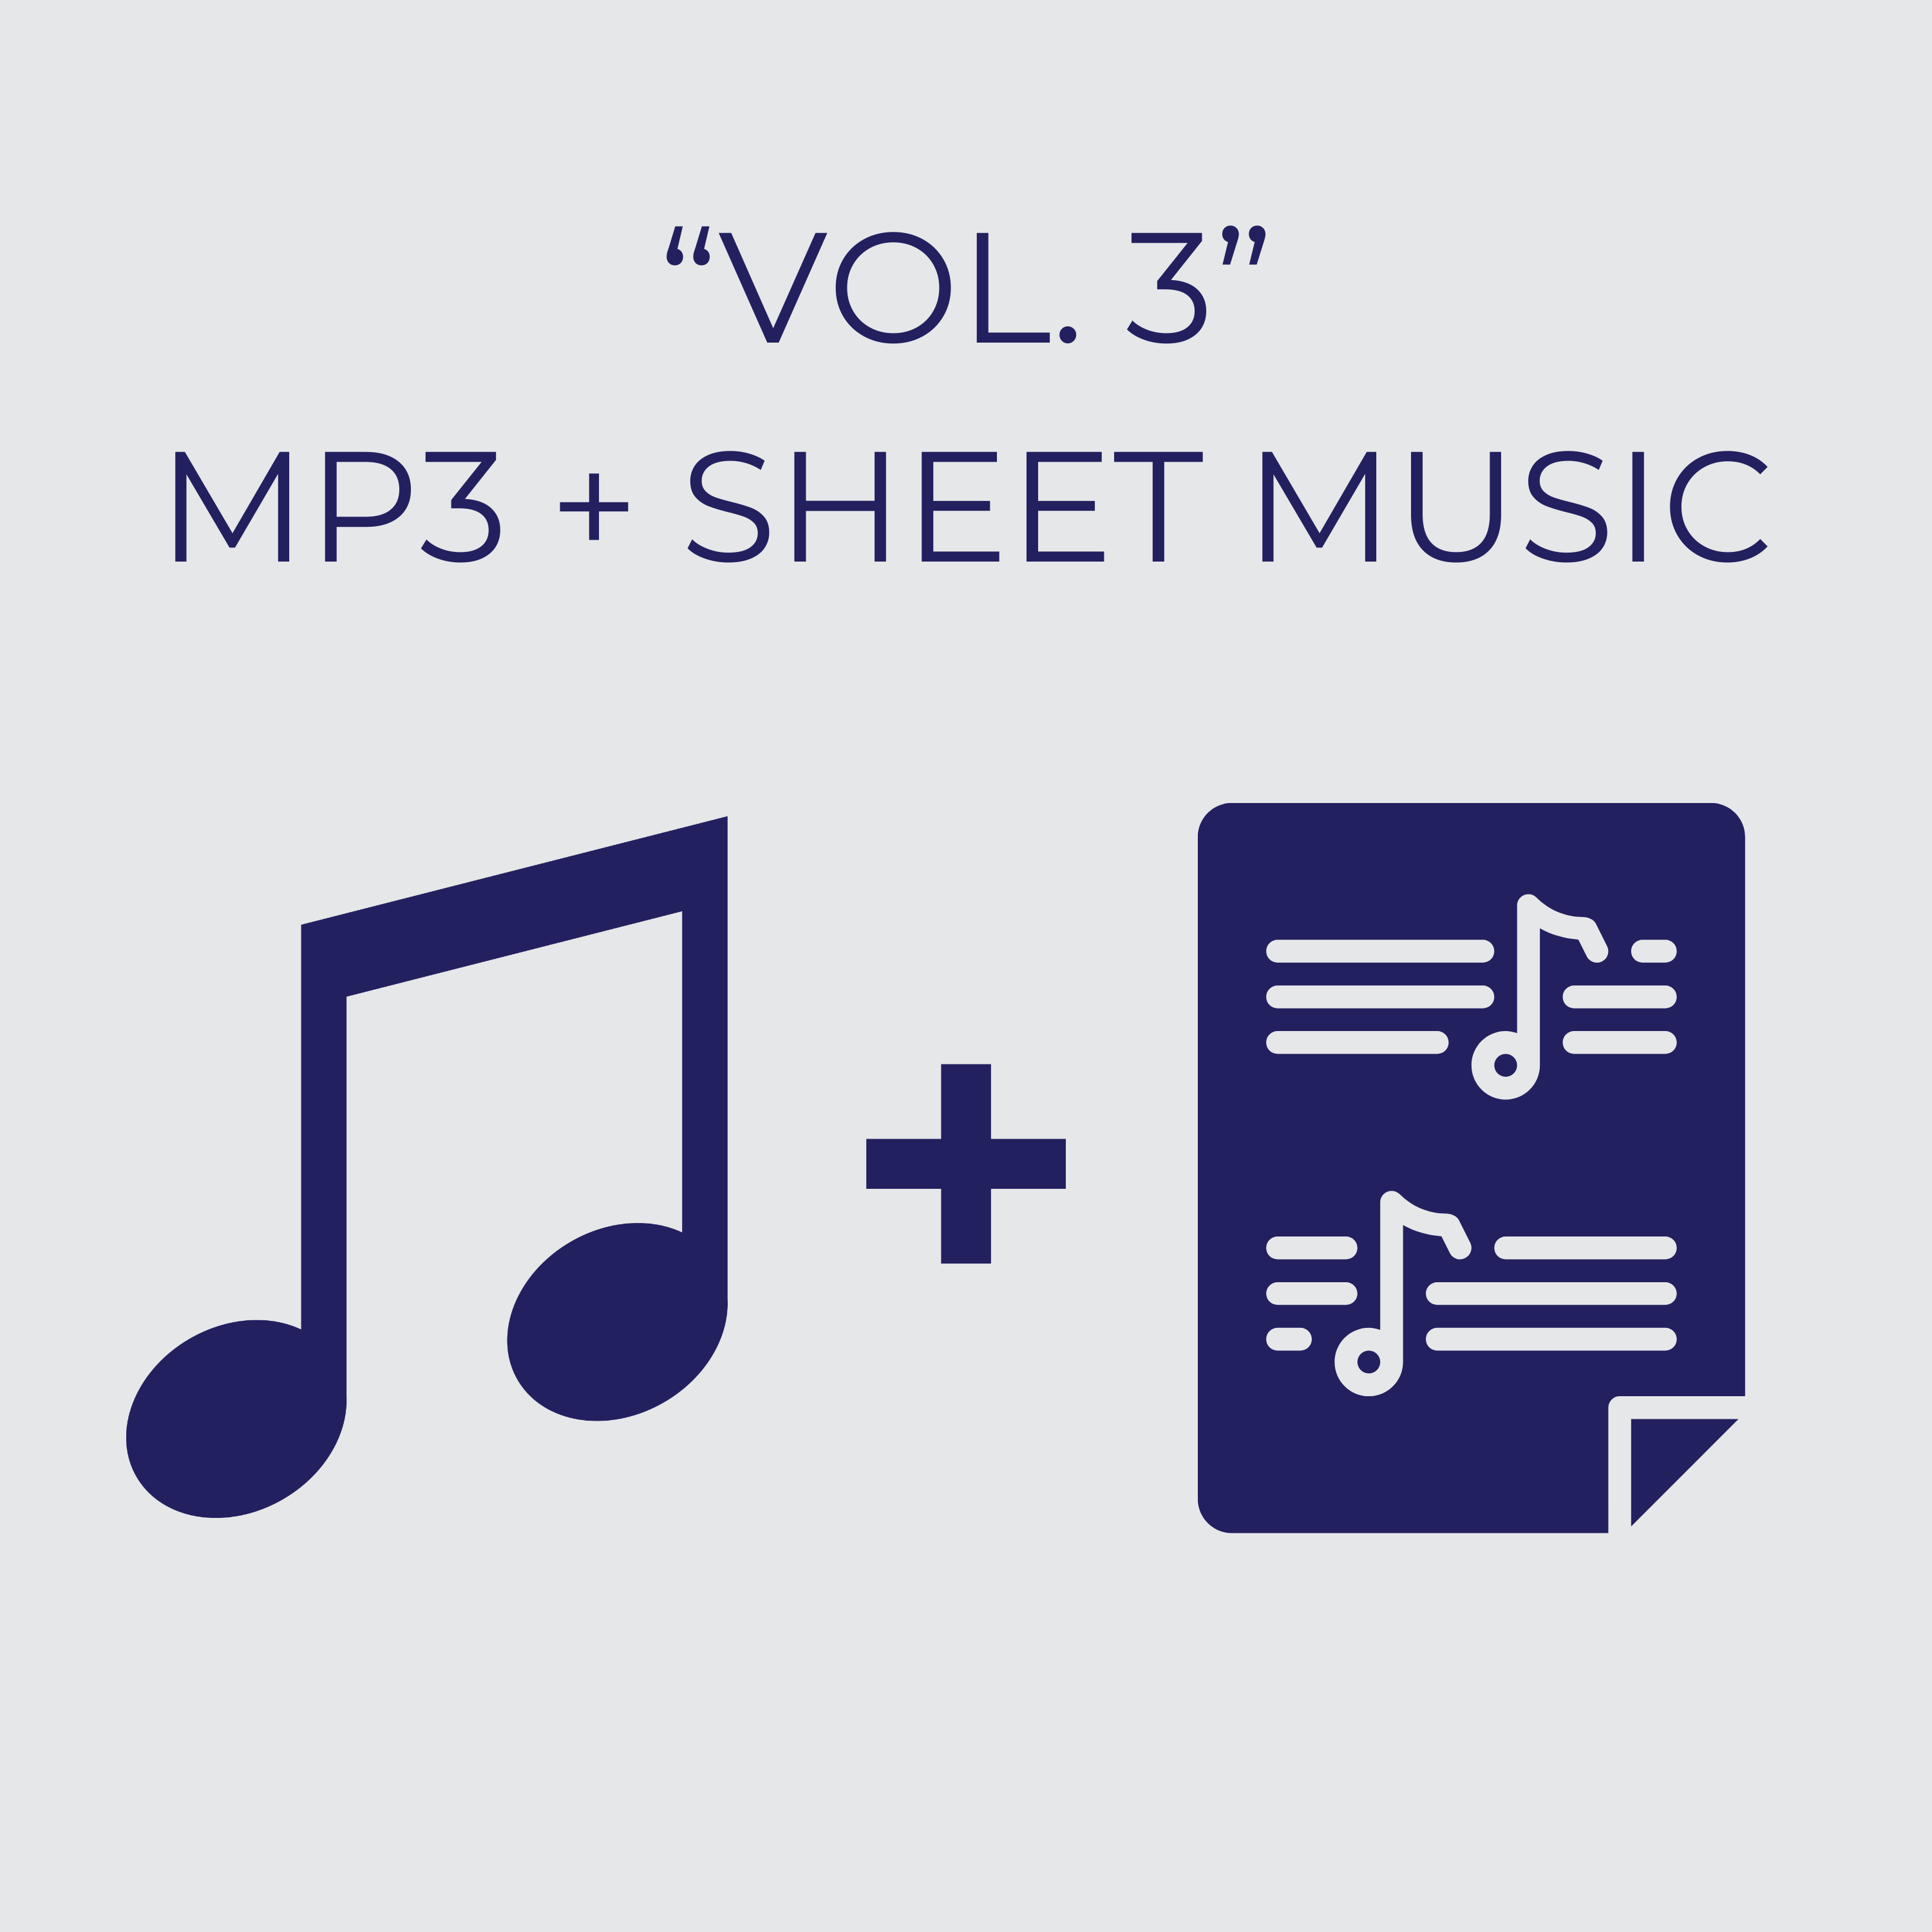 "The Collection, Vol. 3" MP3 and Sheet Music Bundle